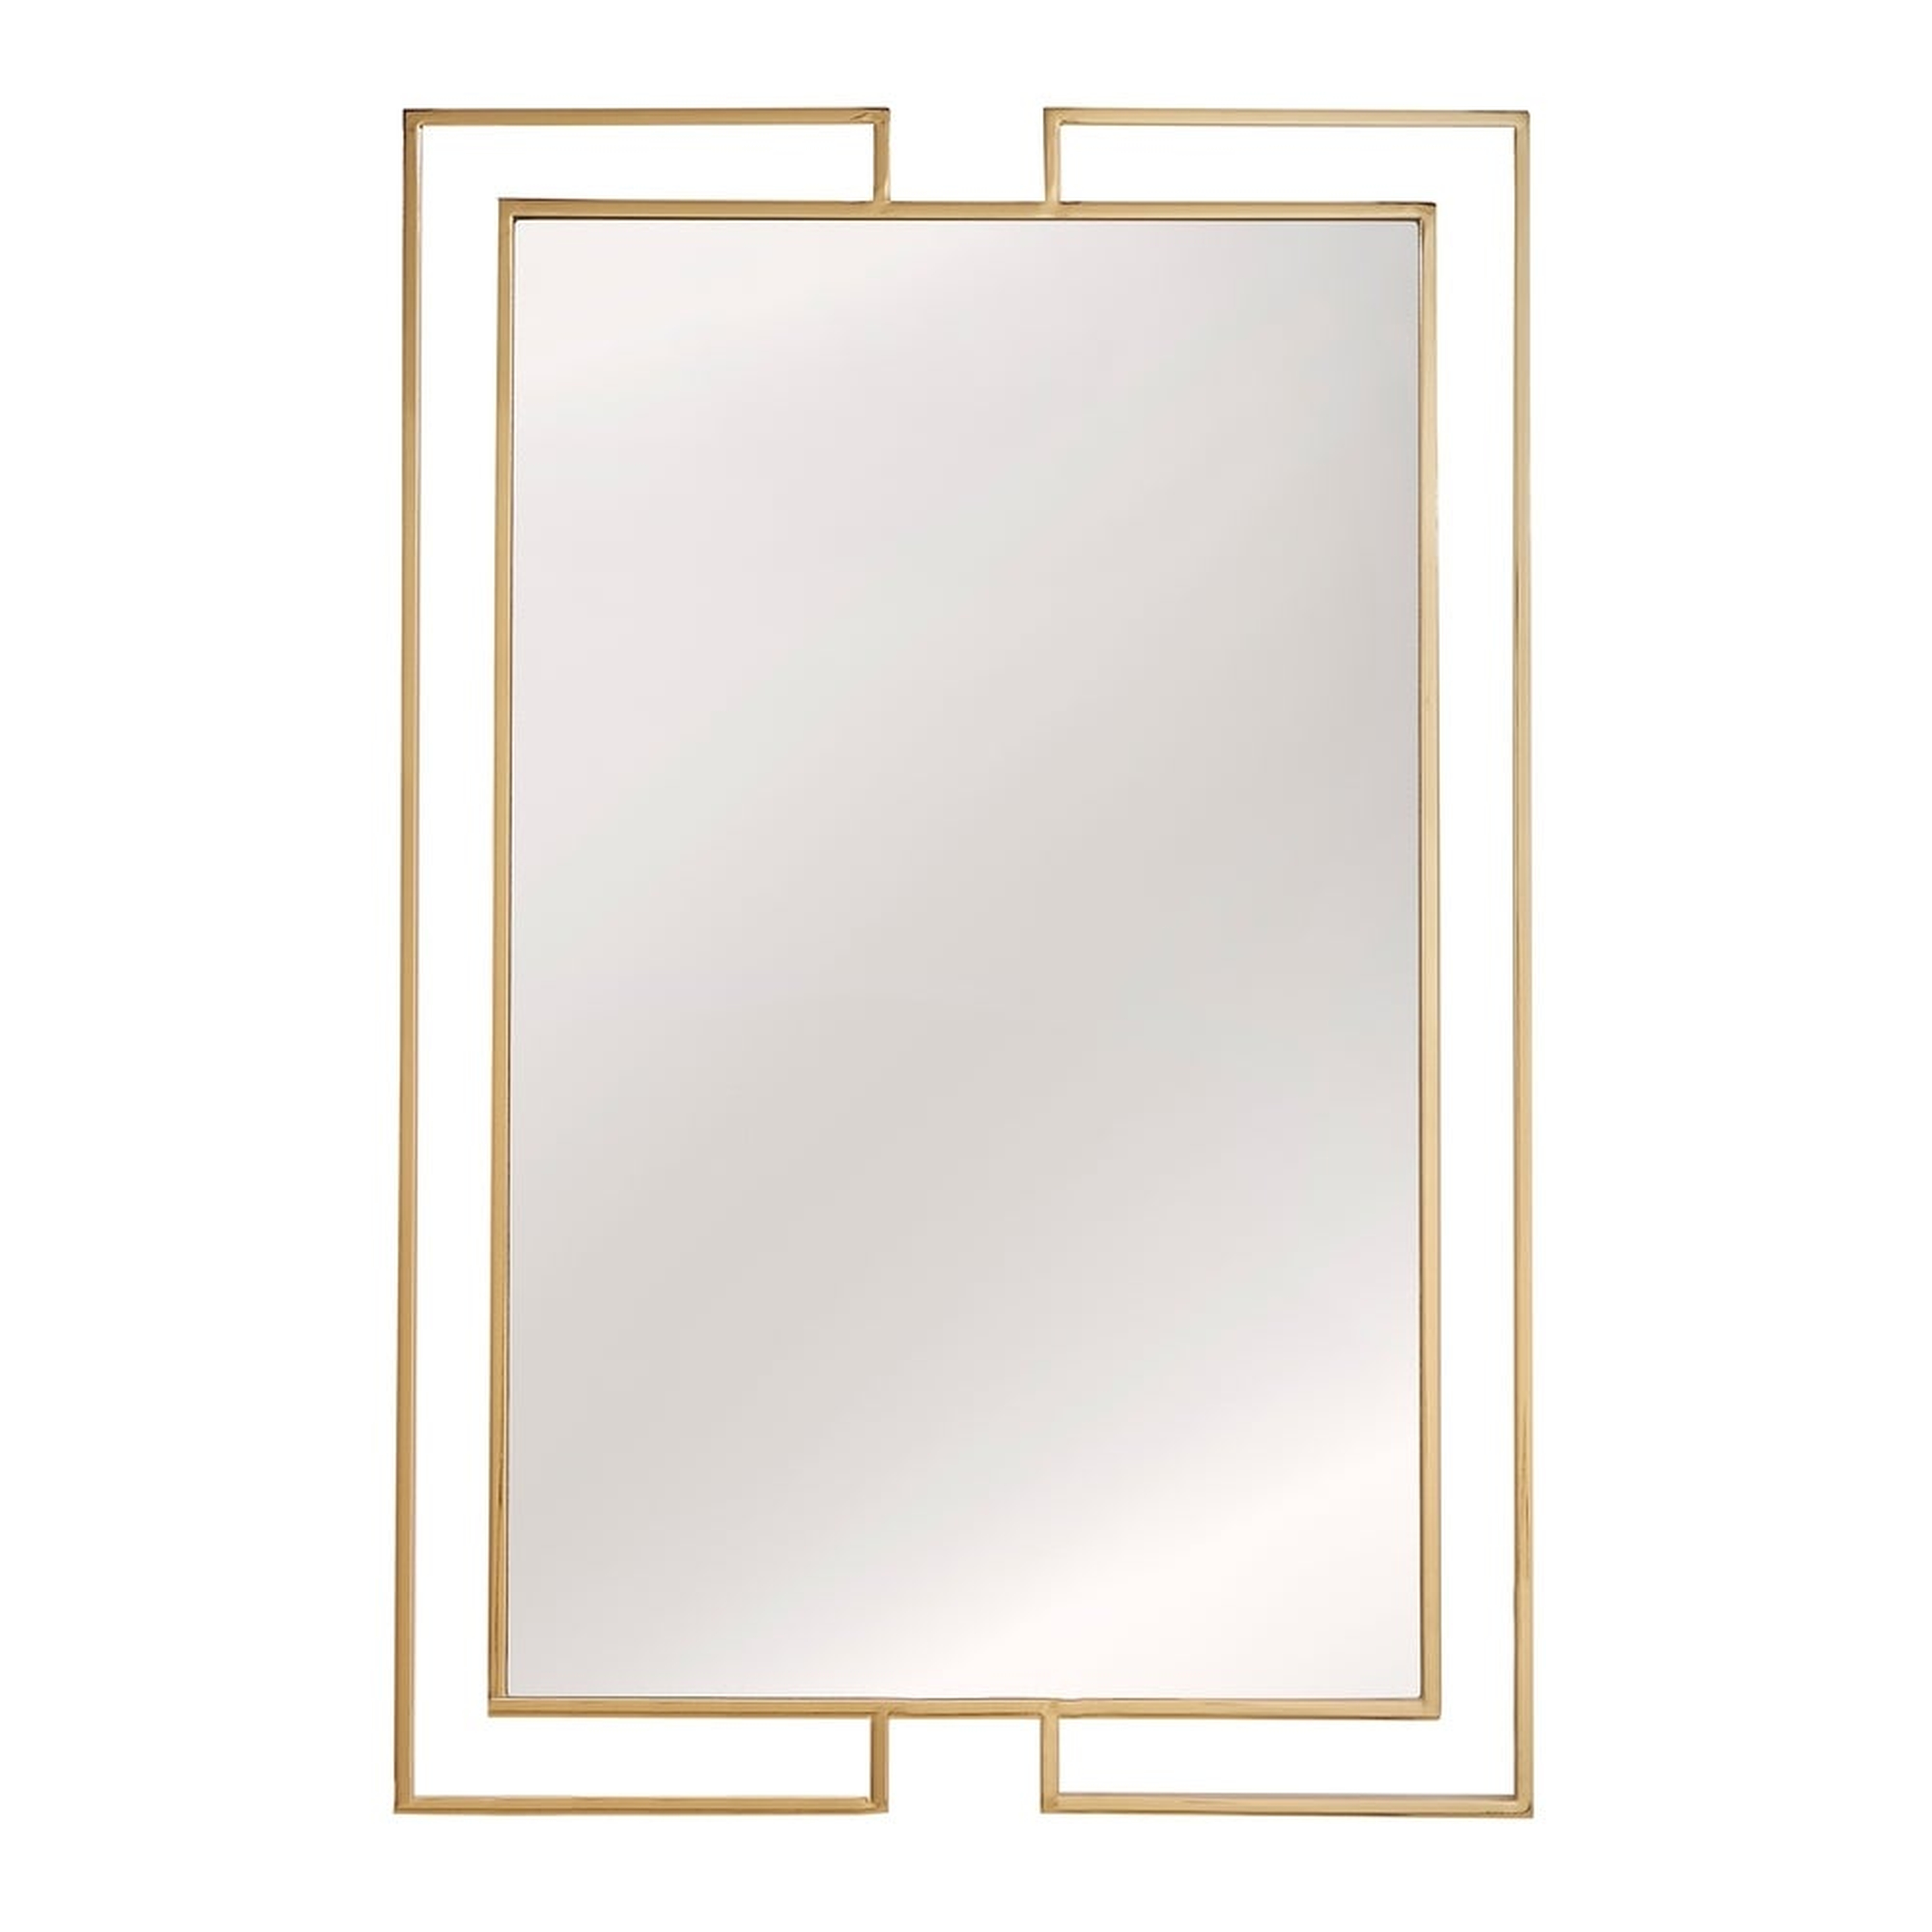 Indrani Gold Finish Frame Rectangular Wall Mirror by iNSPIRE Q Bold - Large - Overstock